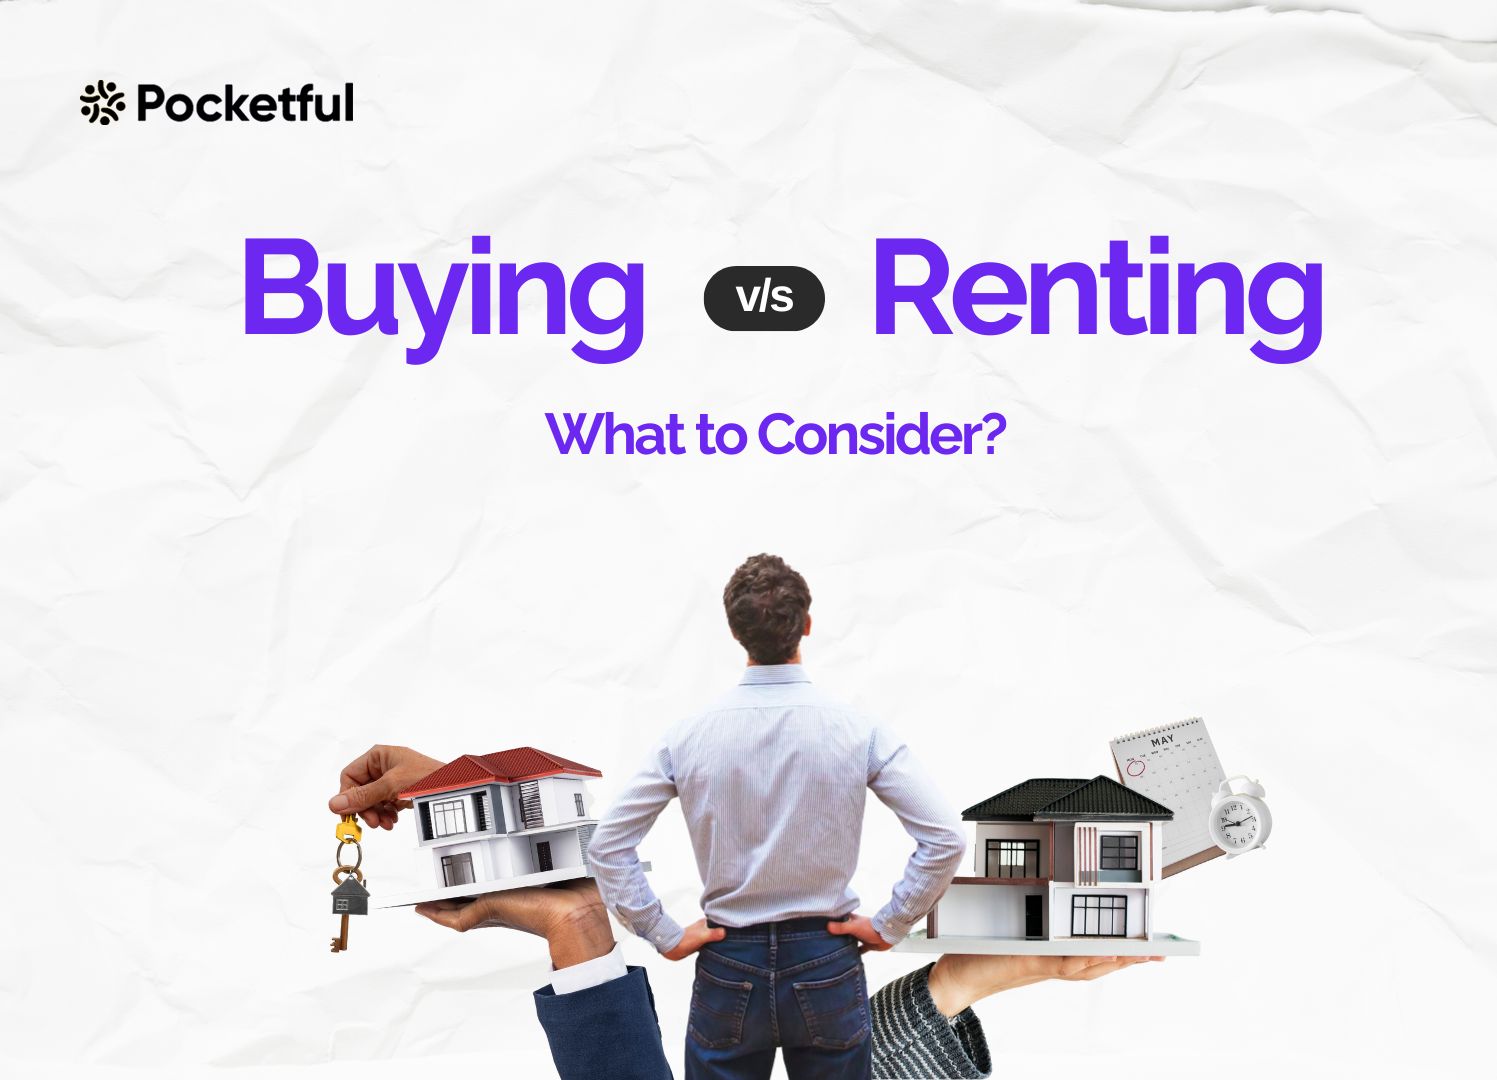 Buying vs Renting: Which Is The Better Choice?